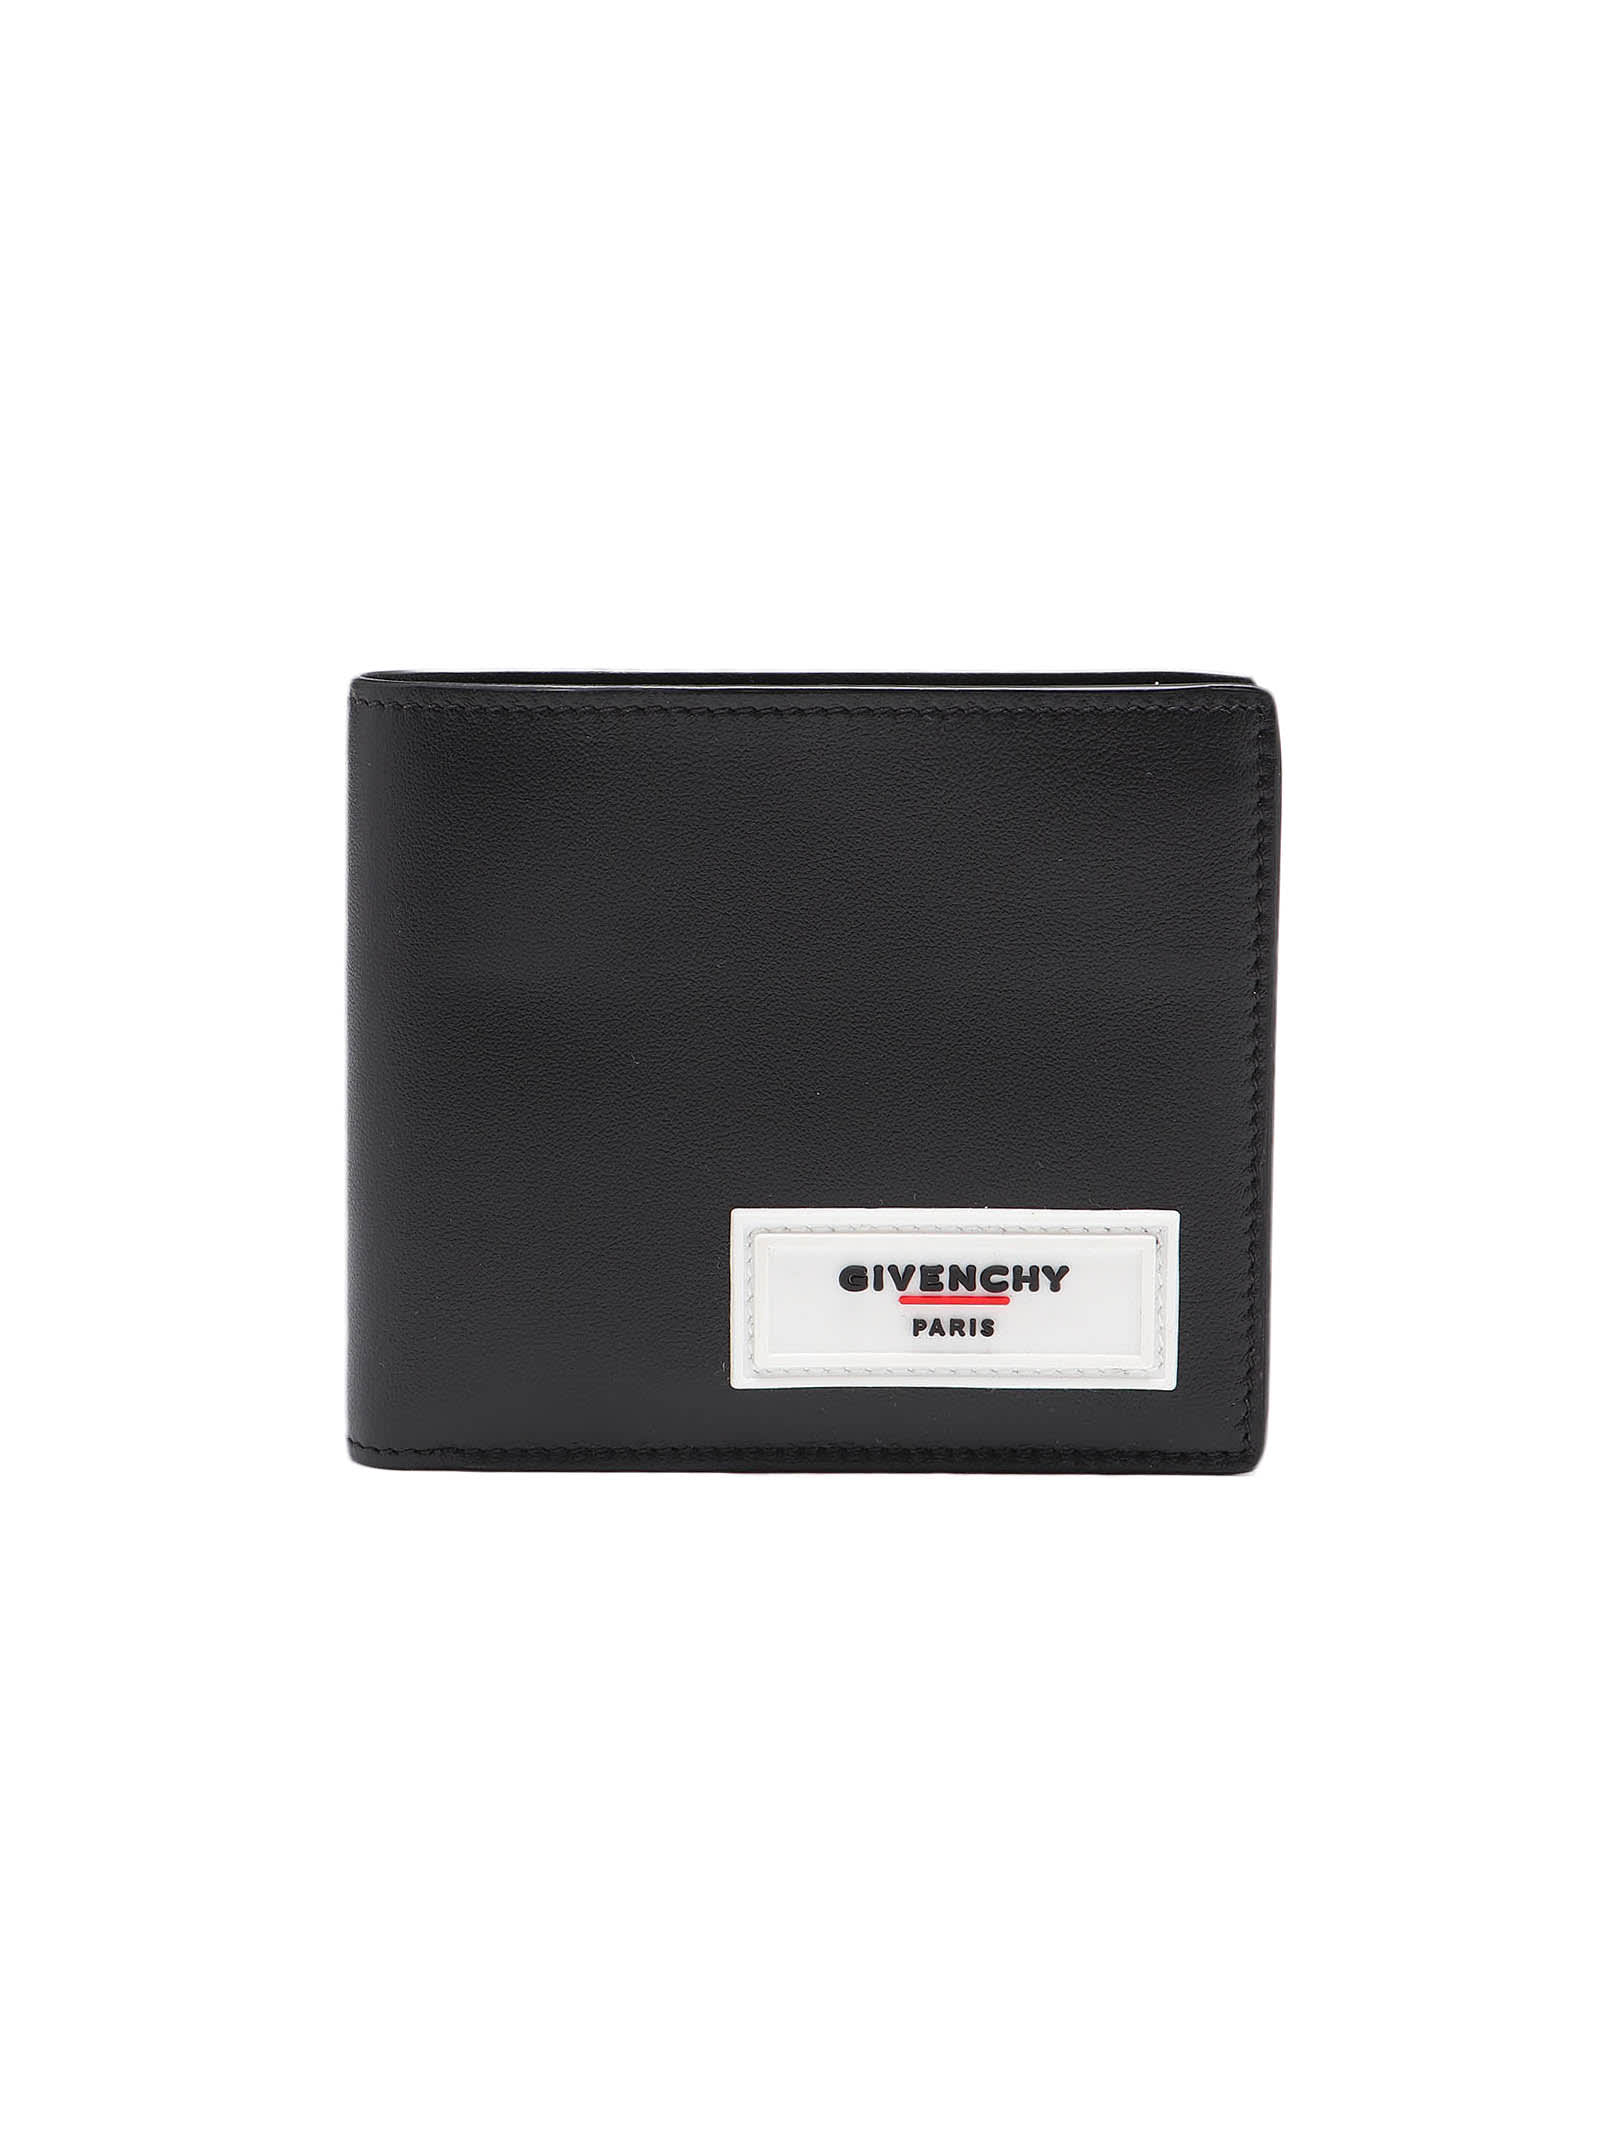 Givenchy Billfold 8cc Wallet In Black/white